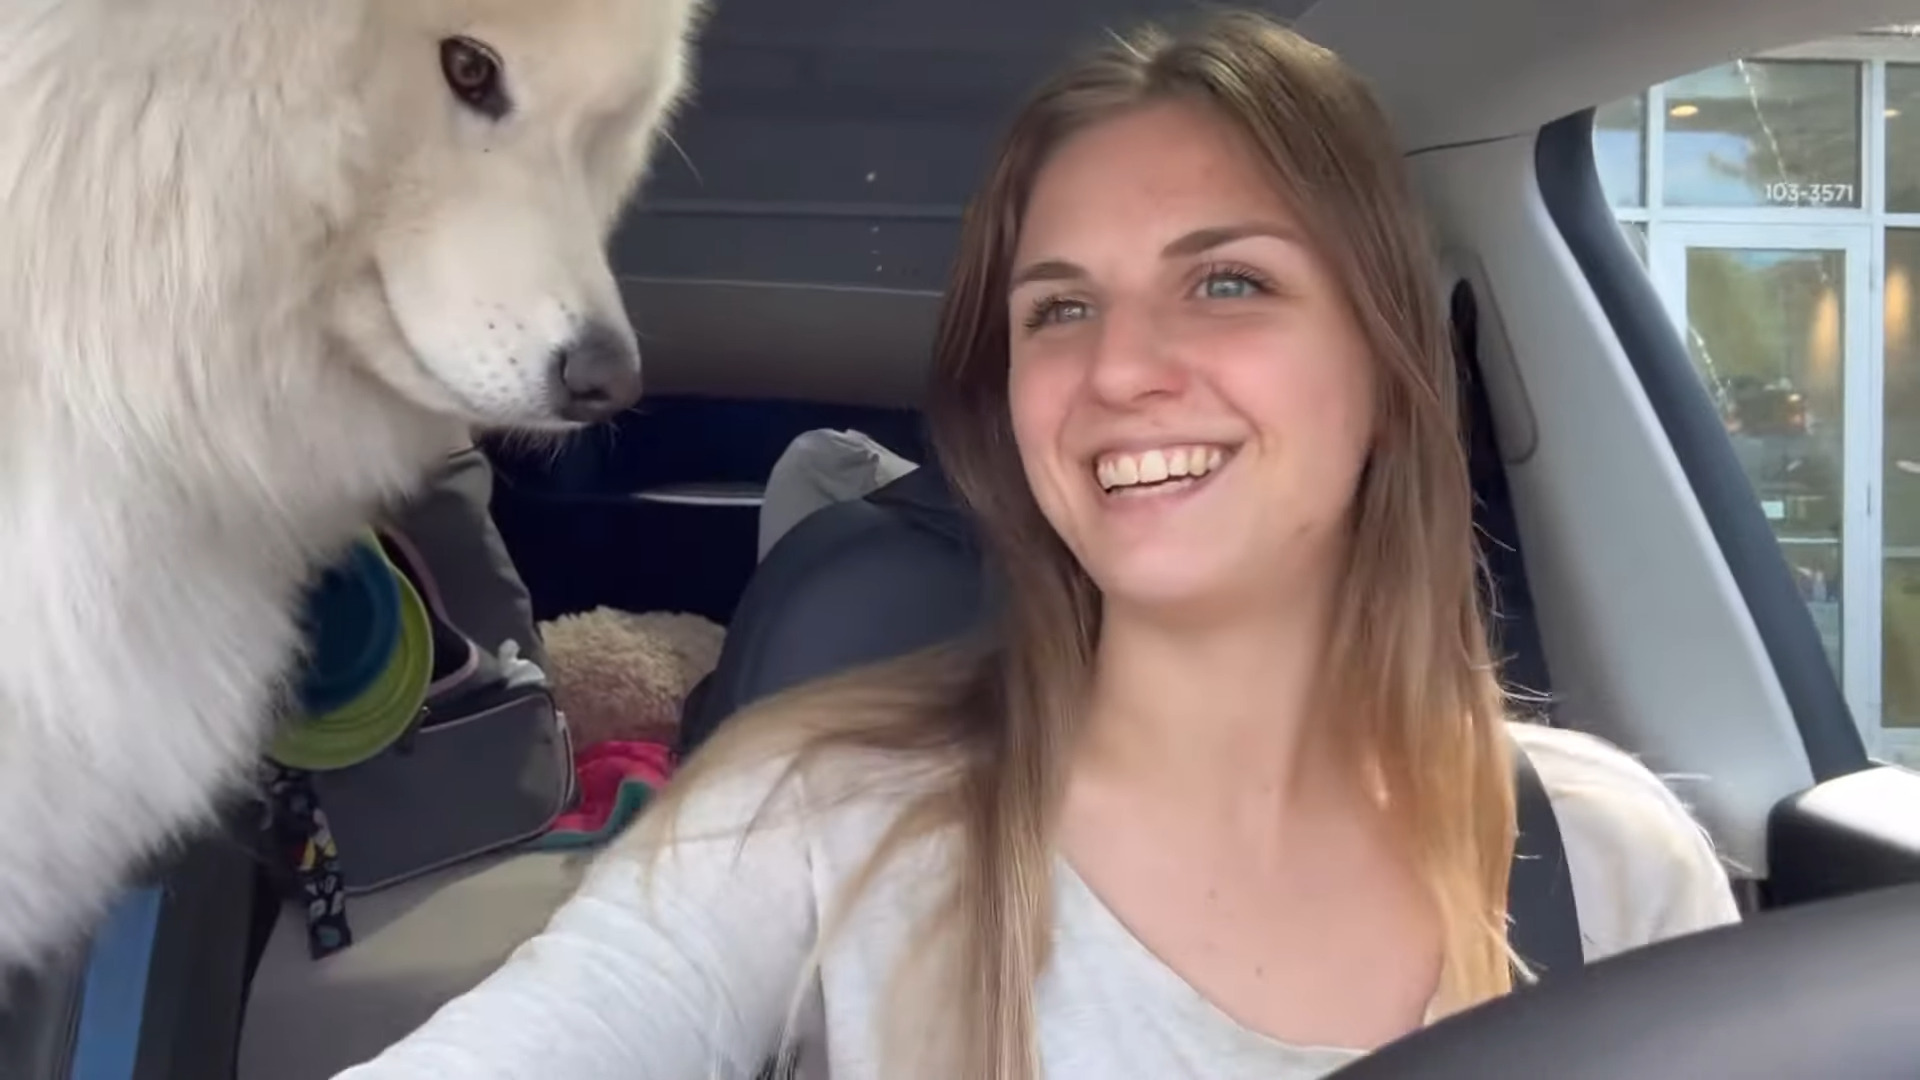 She lives in a Tesla Model Y with her dog and cat